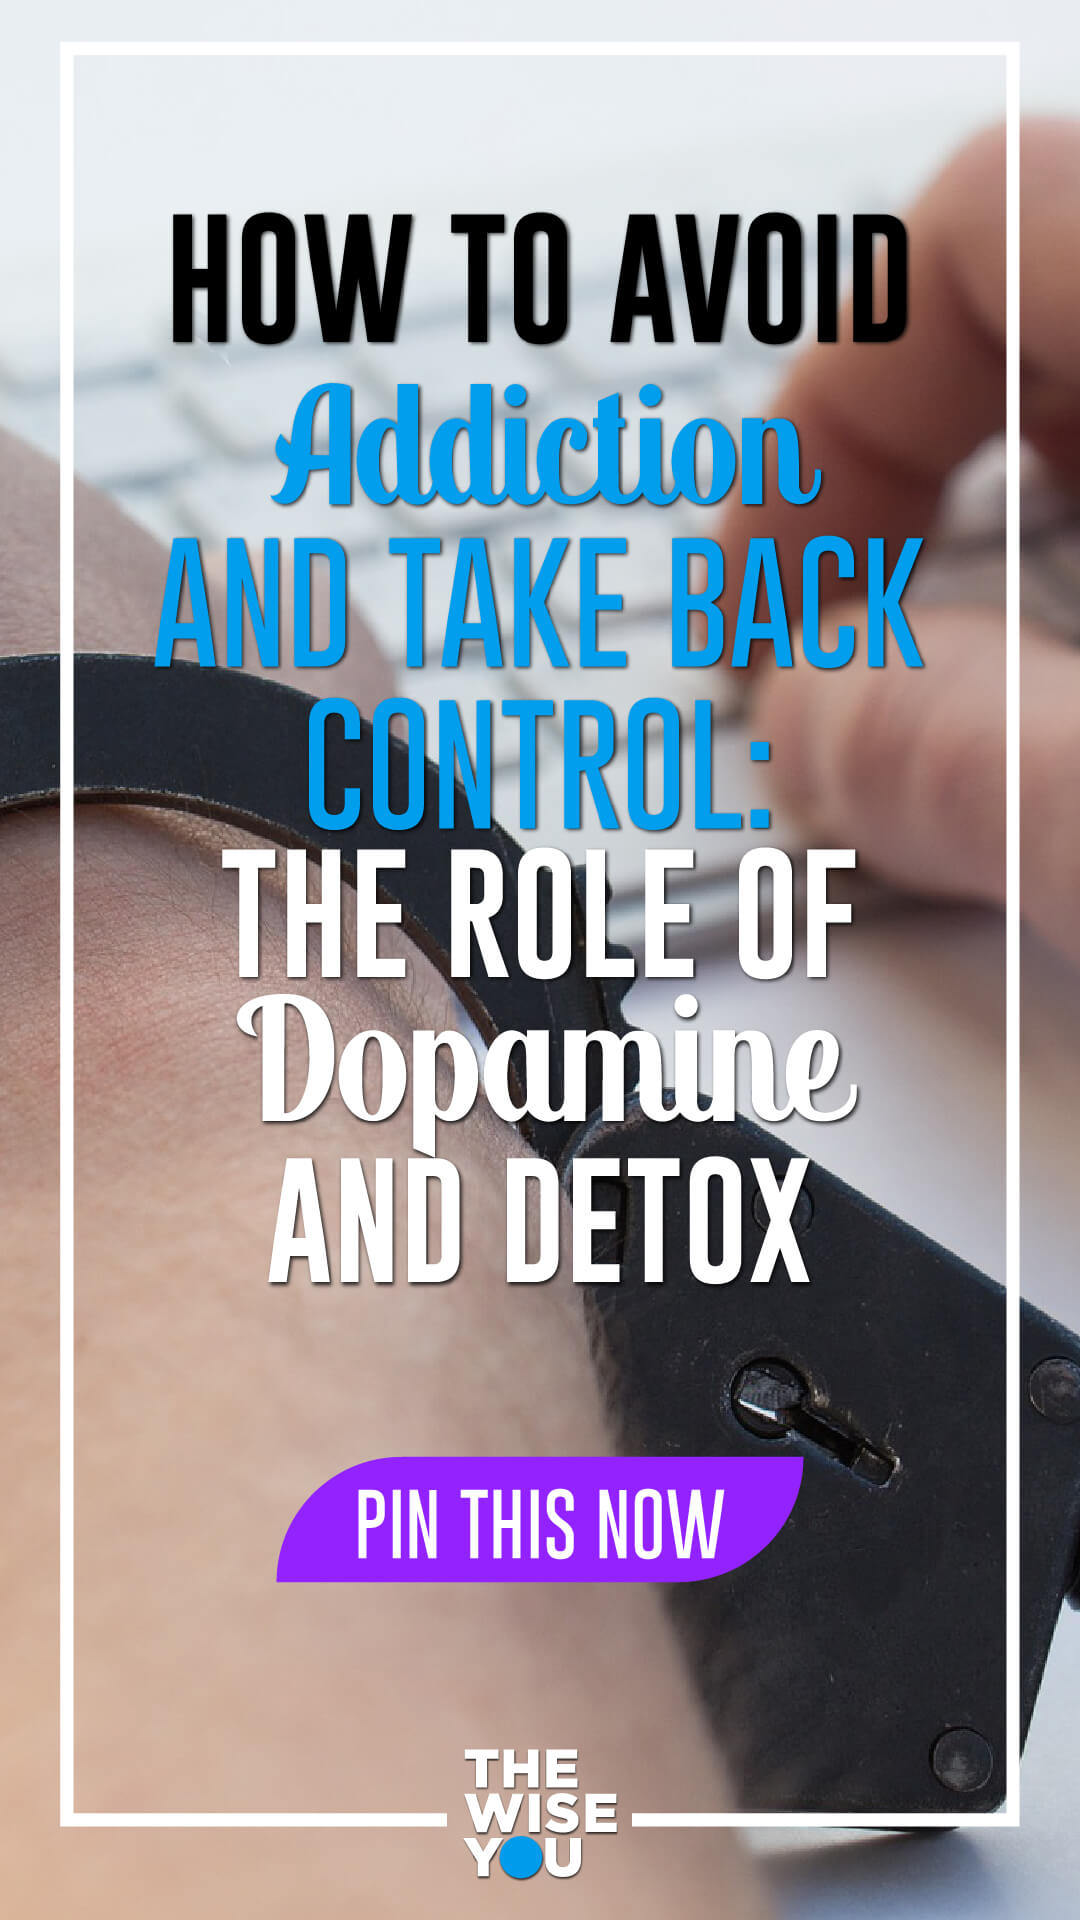 How To Avoid Addiction And Take Back Control: The Role Of Dopamine And Detox